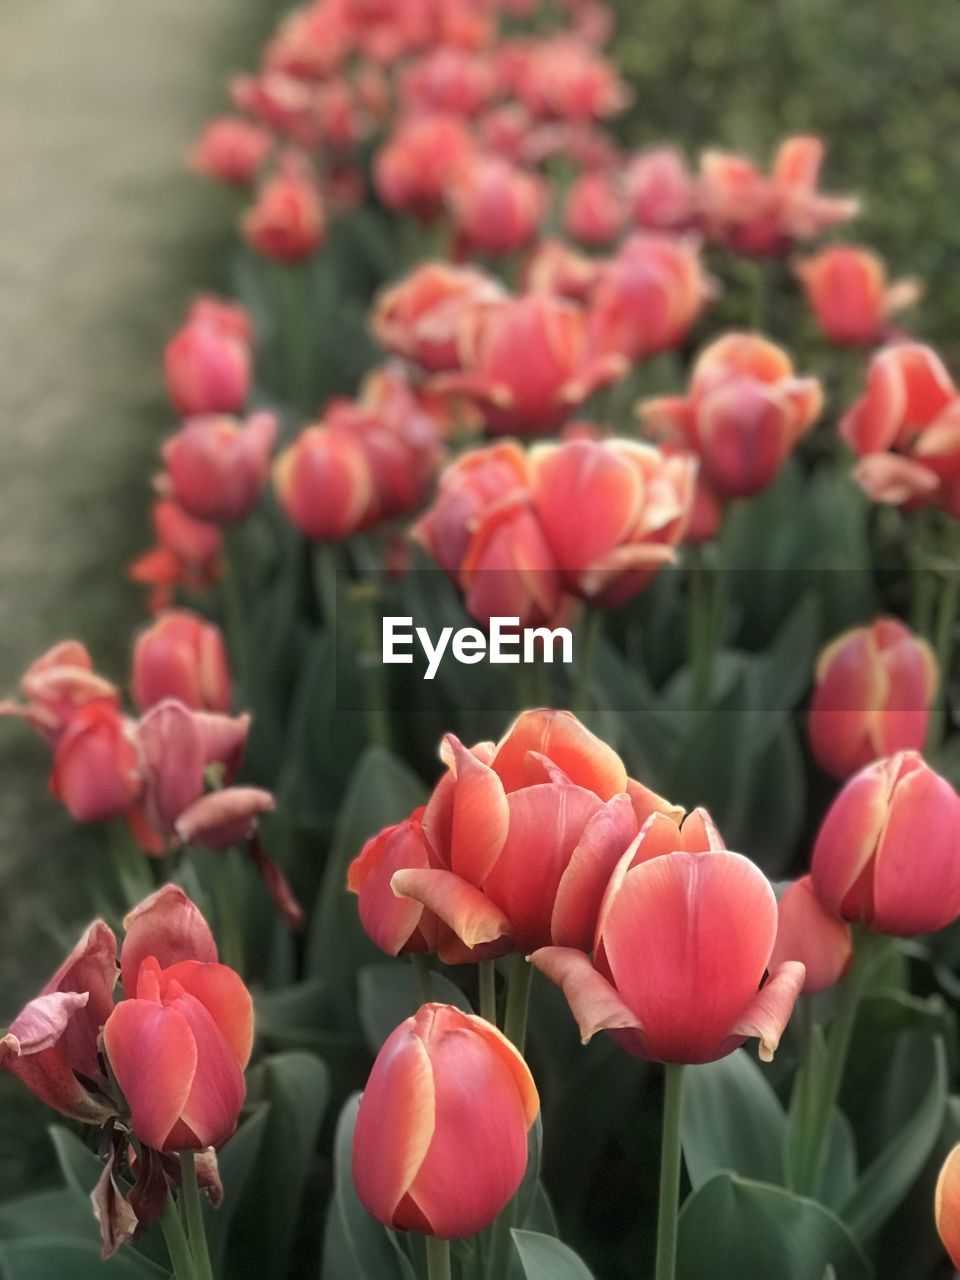 plant, flower, flowering plant, beauty in nature, freshness, tulip, nature, close-up, petal, growth, pink, fragility, flower head, inflorescence, focus on foreground, red, no people, springtime, plant part, leaf, flowerbed, blossom, outdoors, botany, day, selective focus, green, bud, vibrant color, garden, plant stem, multi colored